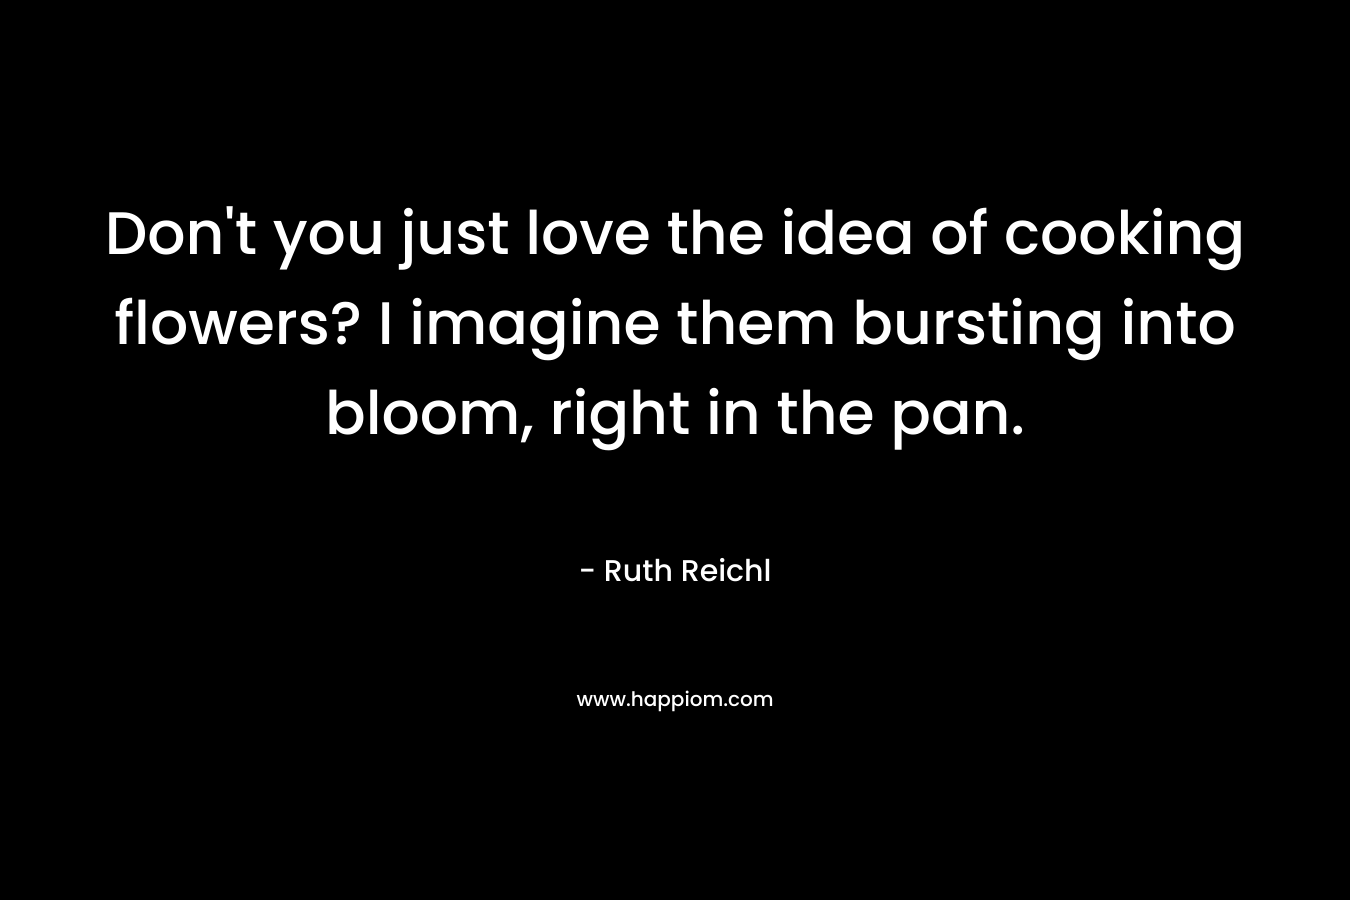 Don’t you just love the idea of cooking flowers? I imagine them bursting into bloom, right in the pan. – Ruth Reichl